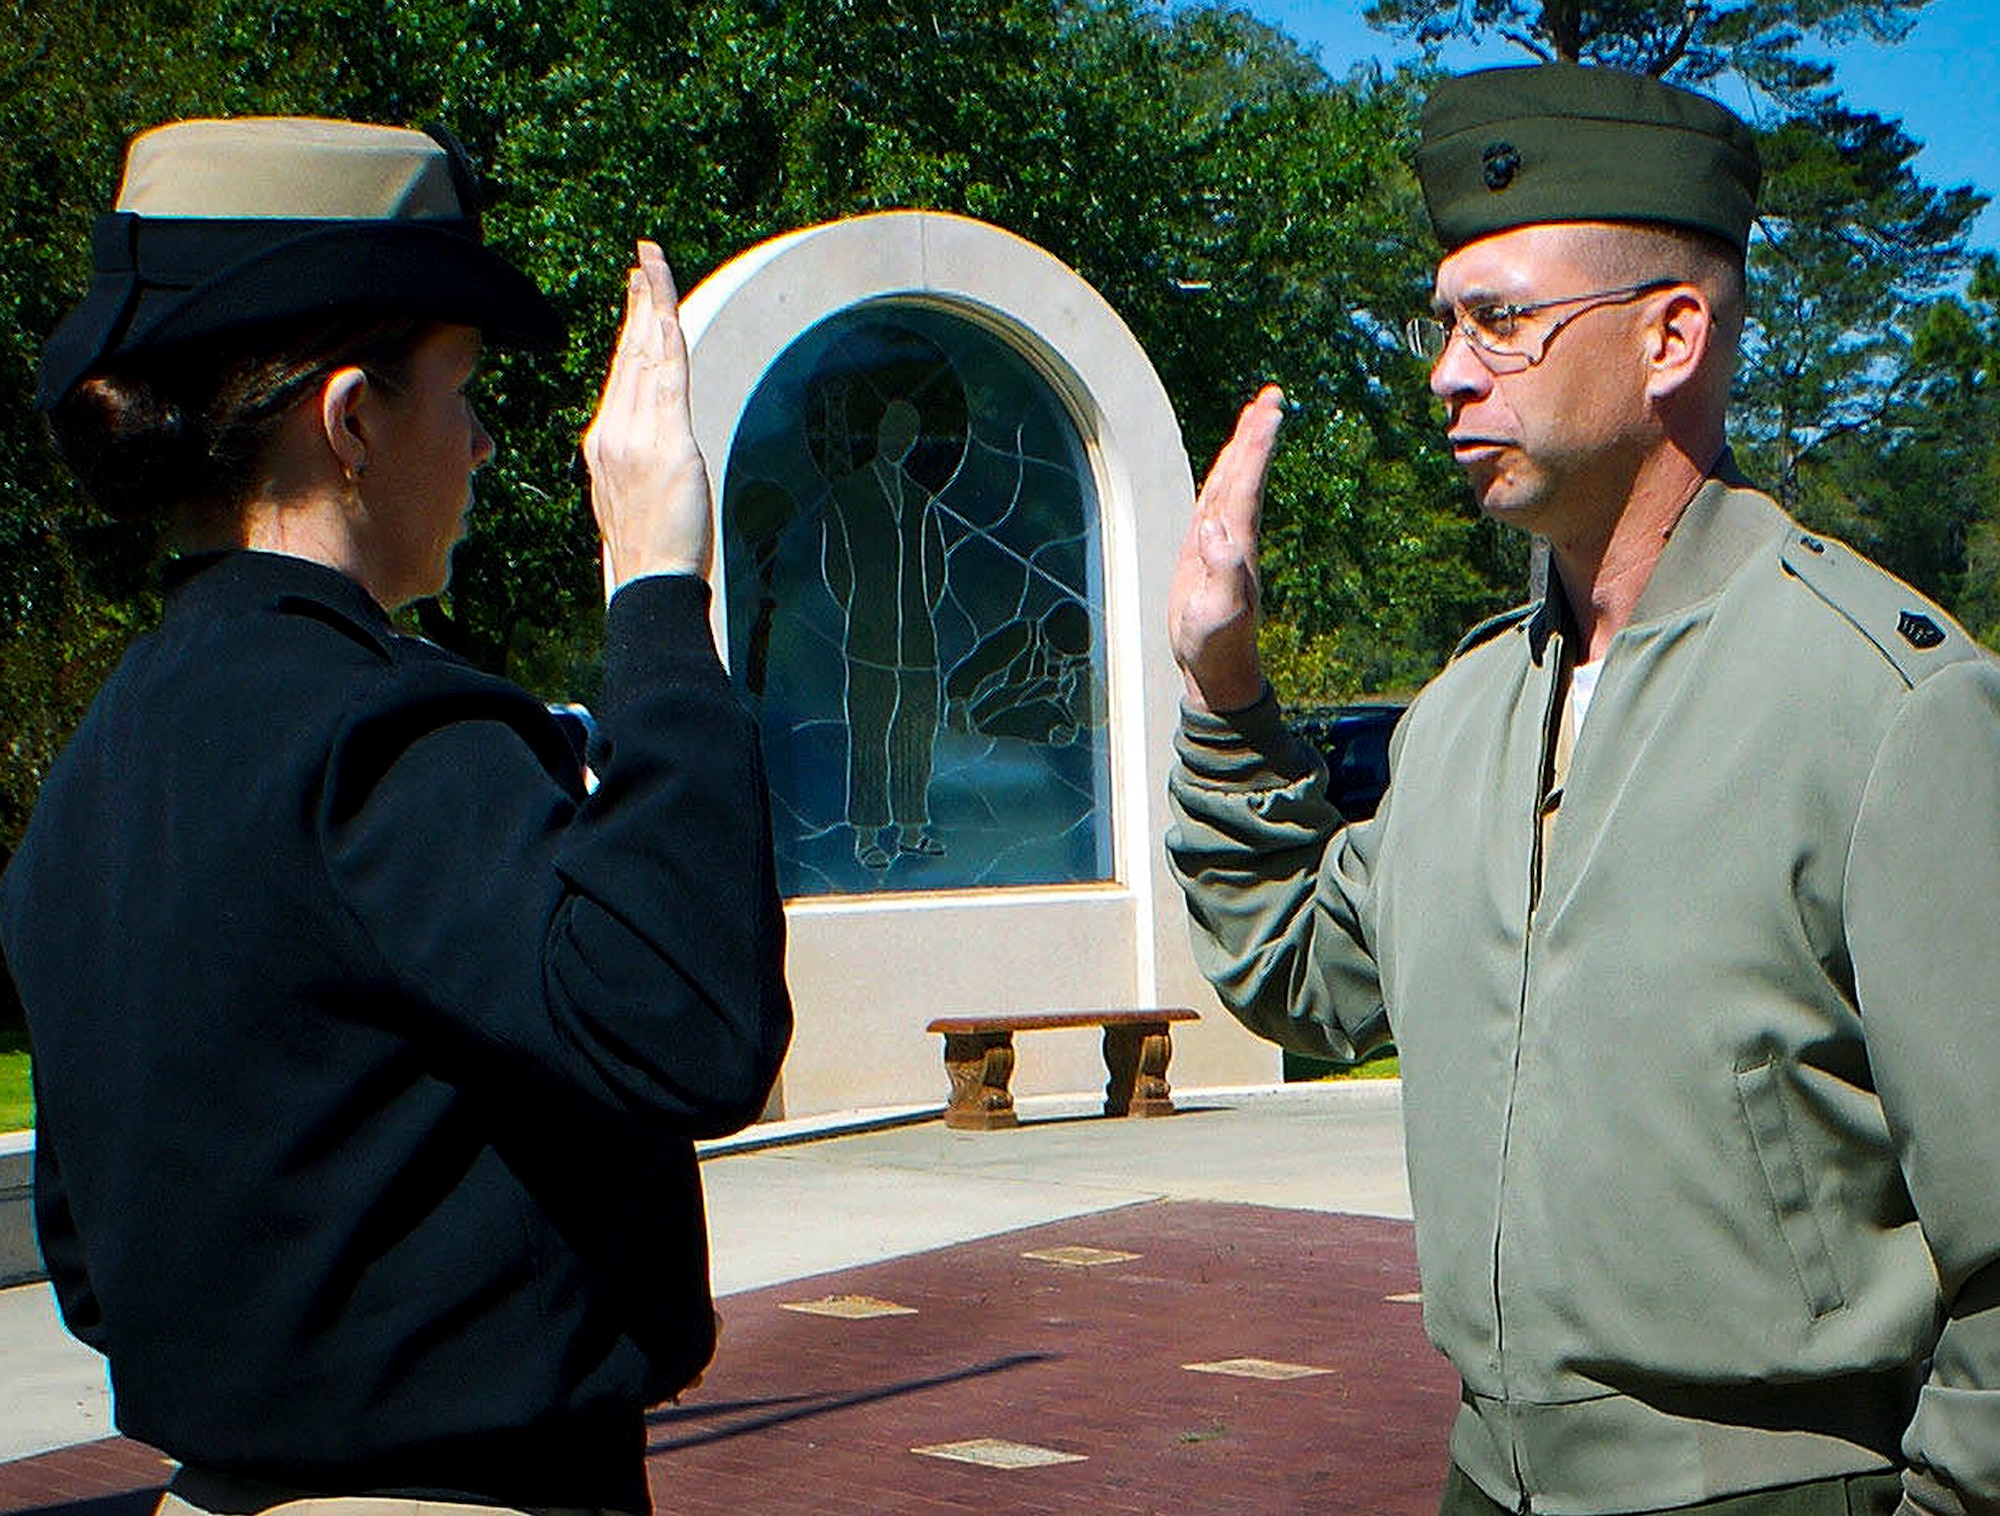 Gunnery Sgt. Markus Lill, the air frames division chief for Marine Fighter Attack Training Squadron 501 recites the oath of enlistment April 12 at the All Wars Memorial, at Eglin Air Force Base Fla.  Lt. j.g. Lisa Lill, who is also married to Lill, administered the oath for his fifth reenlistment.  (Courtesy photo) 